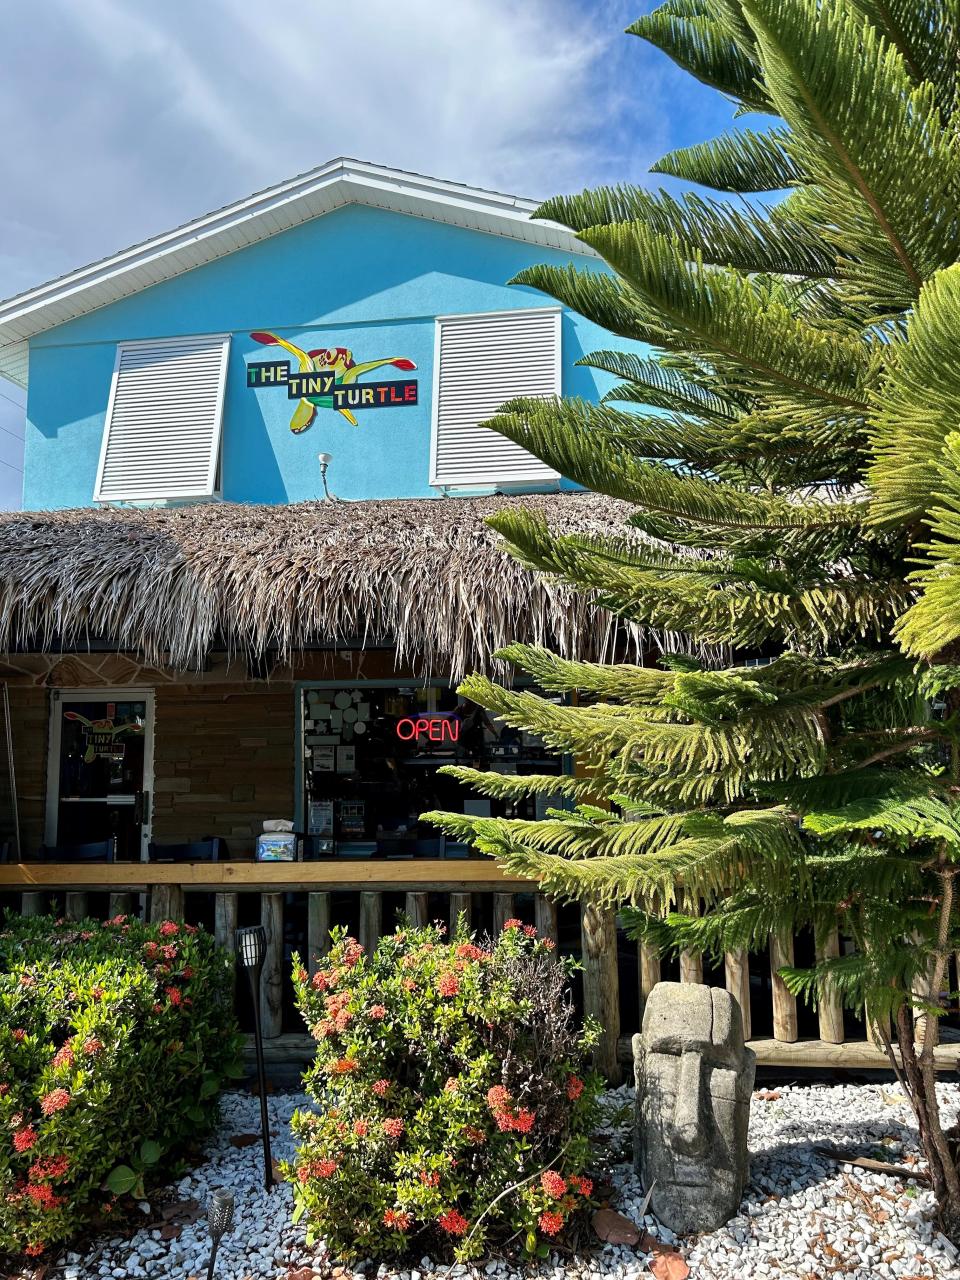 The Tiny Turtle opened in November 2013 in Cocoa Beach.